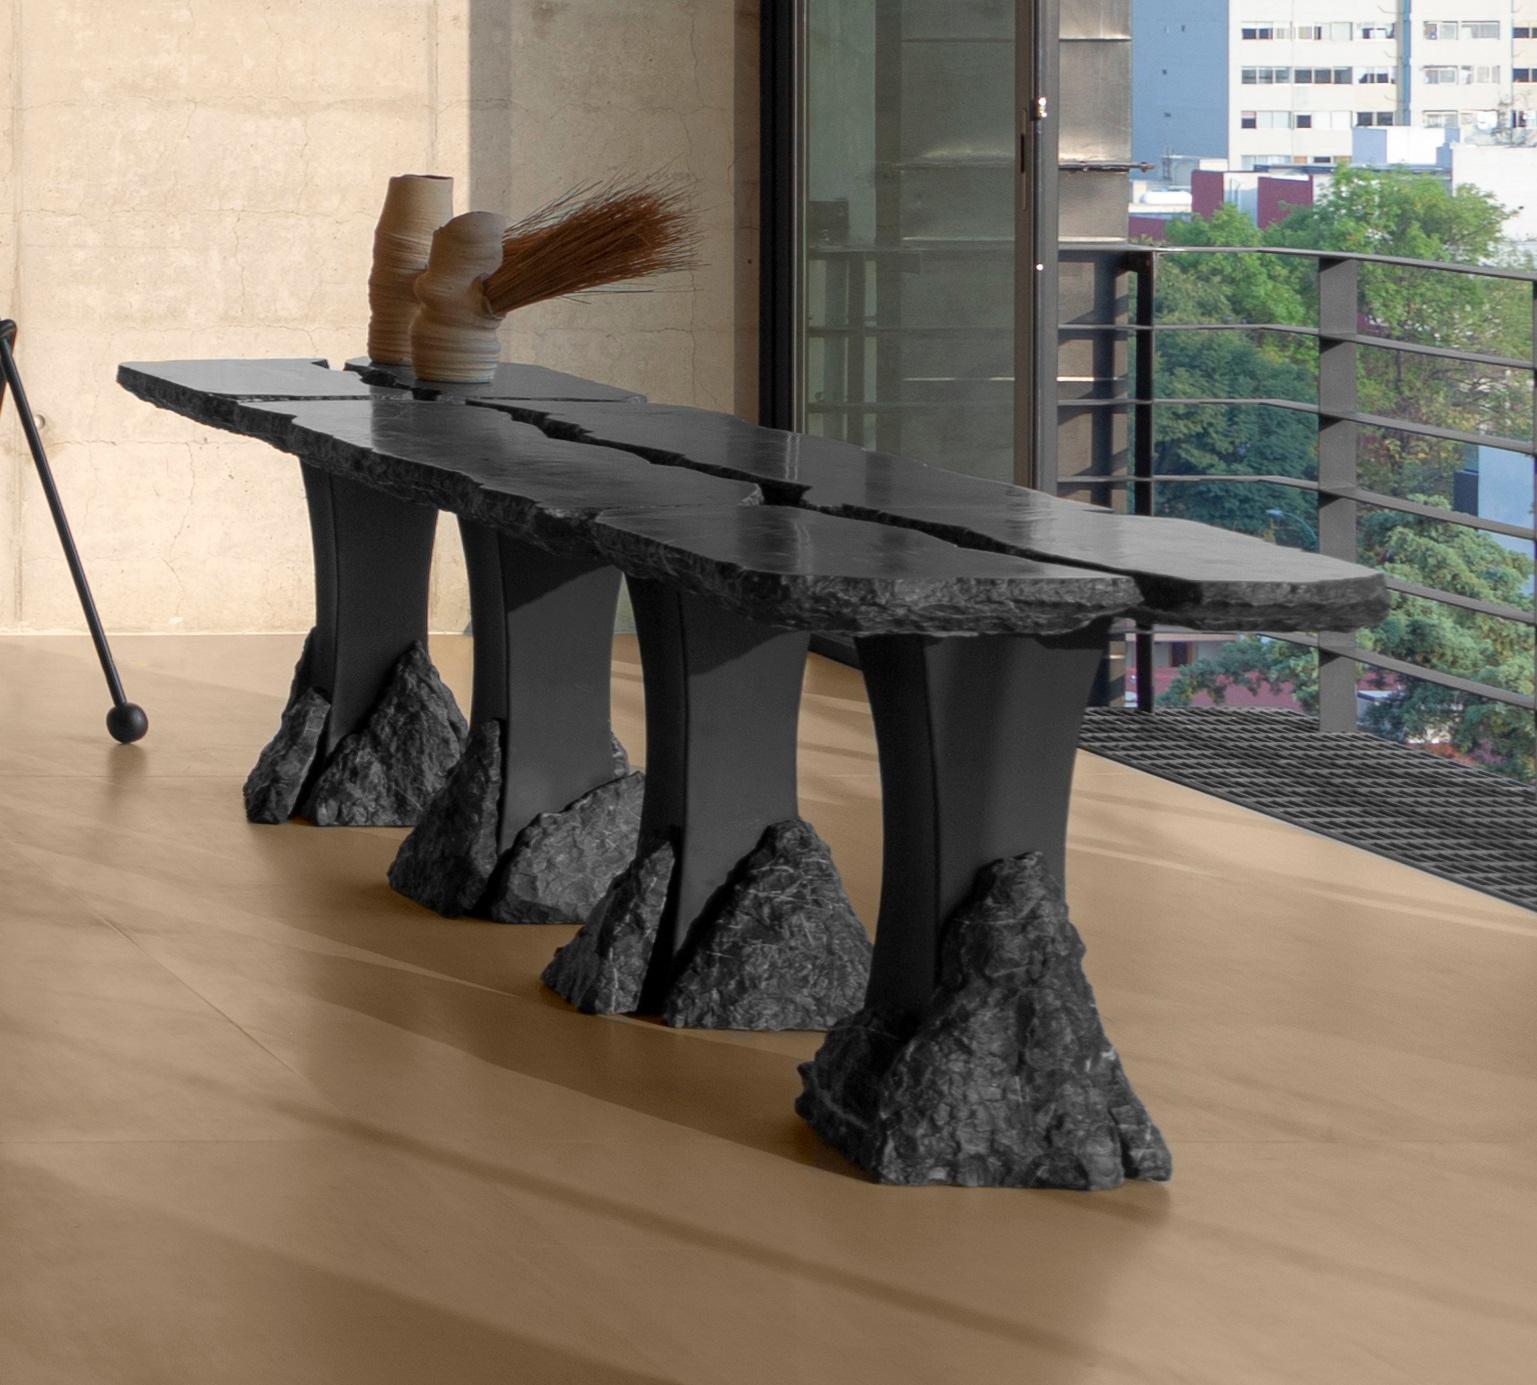 Set of 3 Divergente tables by Andres Monnier
One of a Kind.
Dimensions: D 100 x W 160 x H 70 cm.
Materials: black marble.

1 x Divergente Dos table
2 x Divergente Uno table

A divergent boundary occurs when two tectonic plates move away from